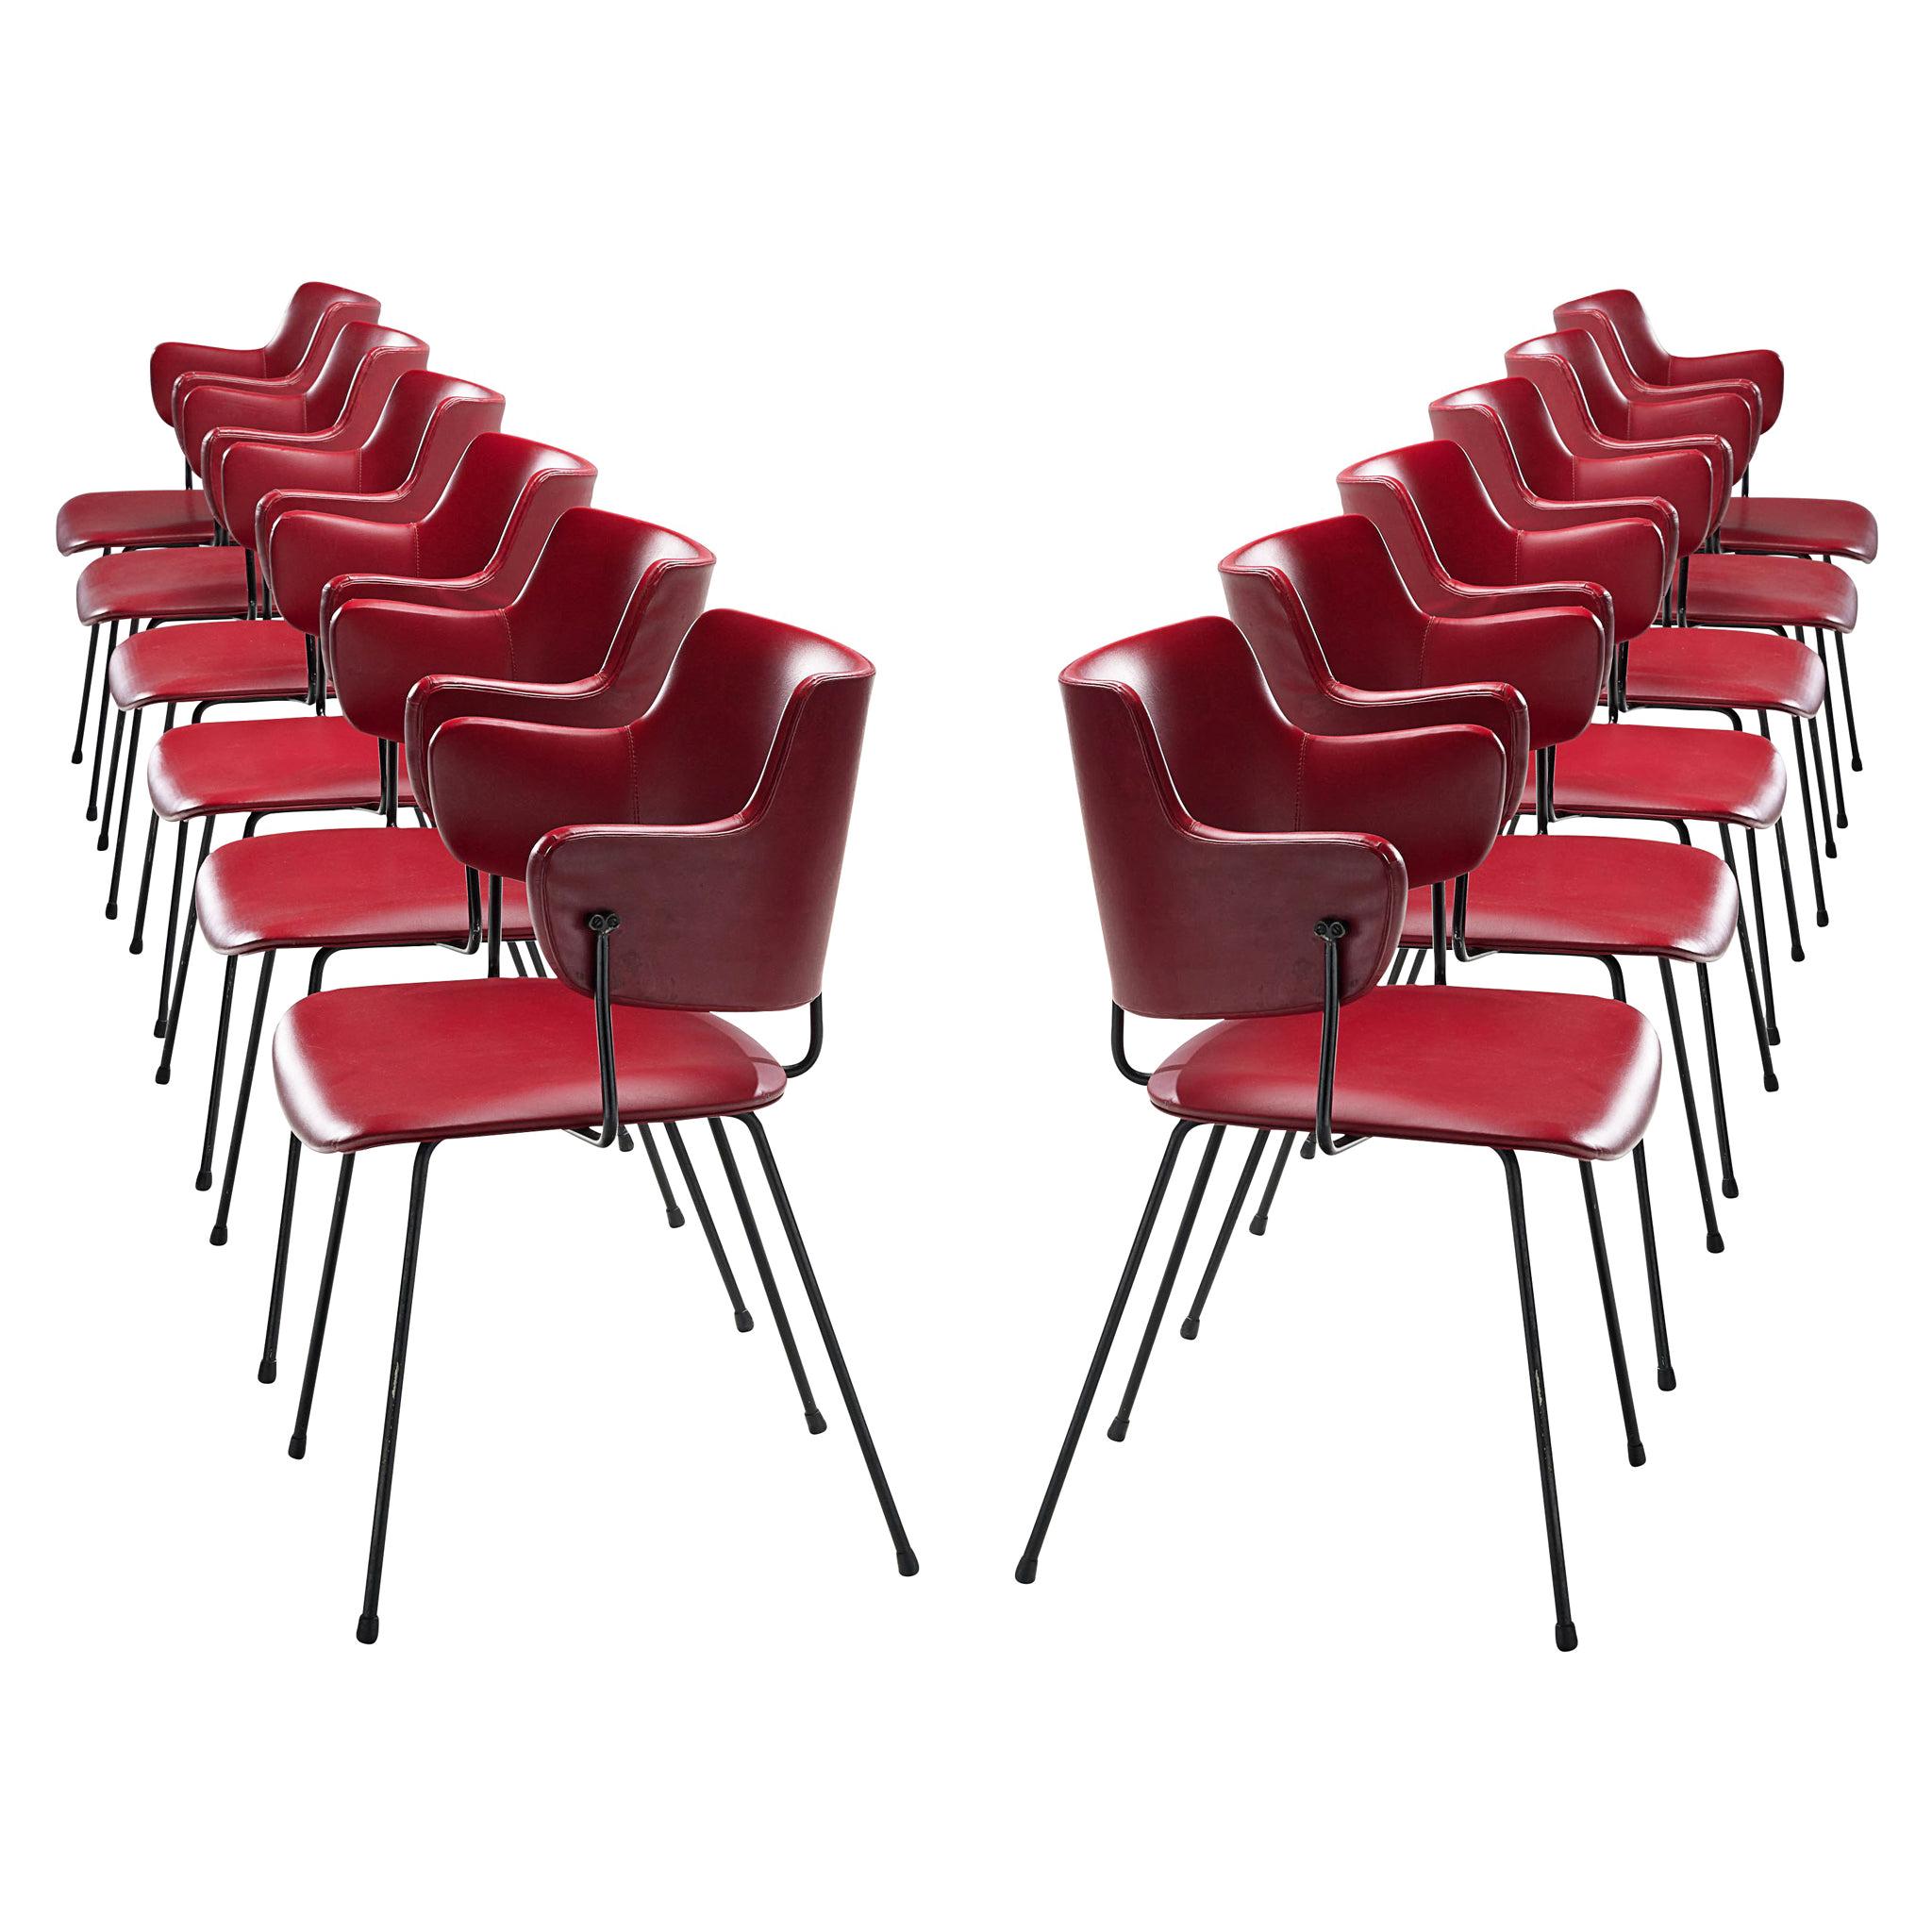 Wim Rietveld & W.H. Gispen '205' Chair in Red for Kembo